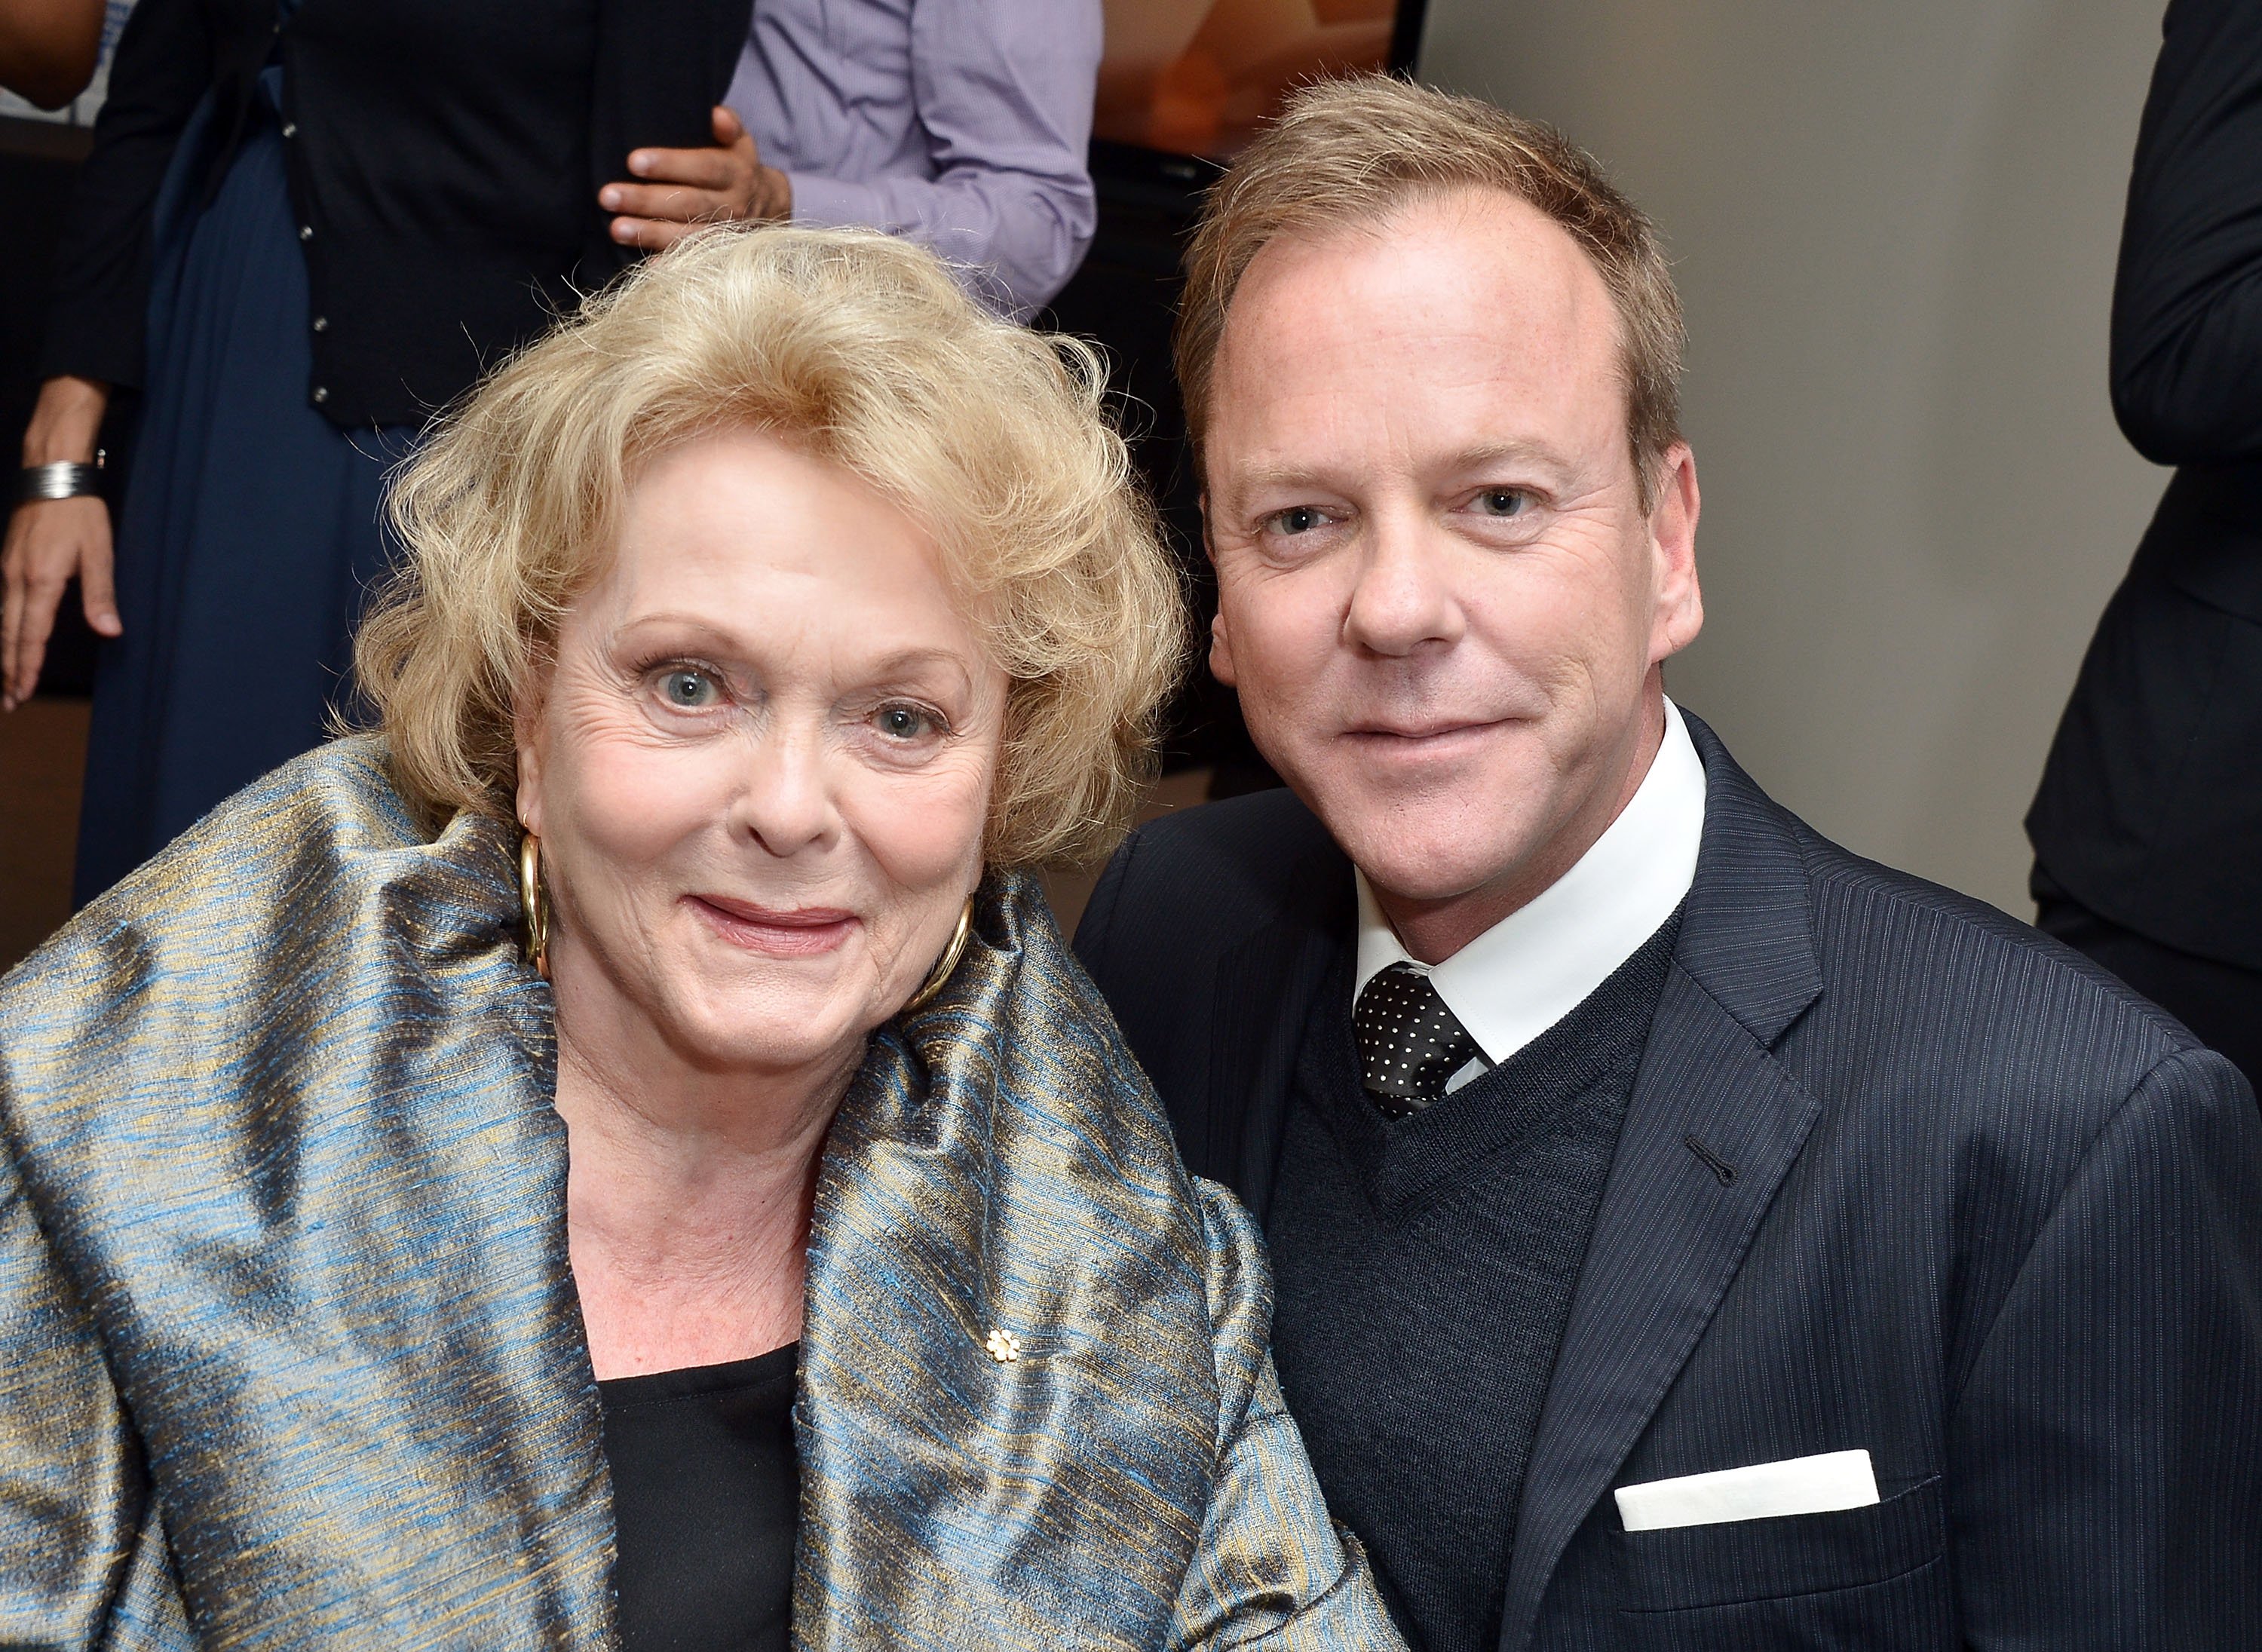 Kiefer Sutherland and Shirley Douglas attend "The Reluctant Fundamentalist" premiere during the 2012 Toronto International Film Festival on September 8, 2012 in Toronto, Canada | Photo: GettyImages